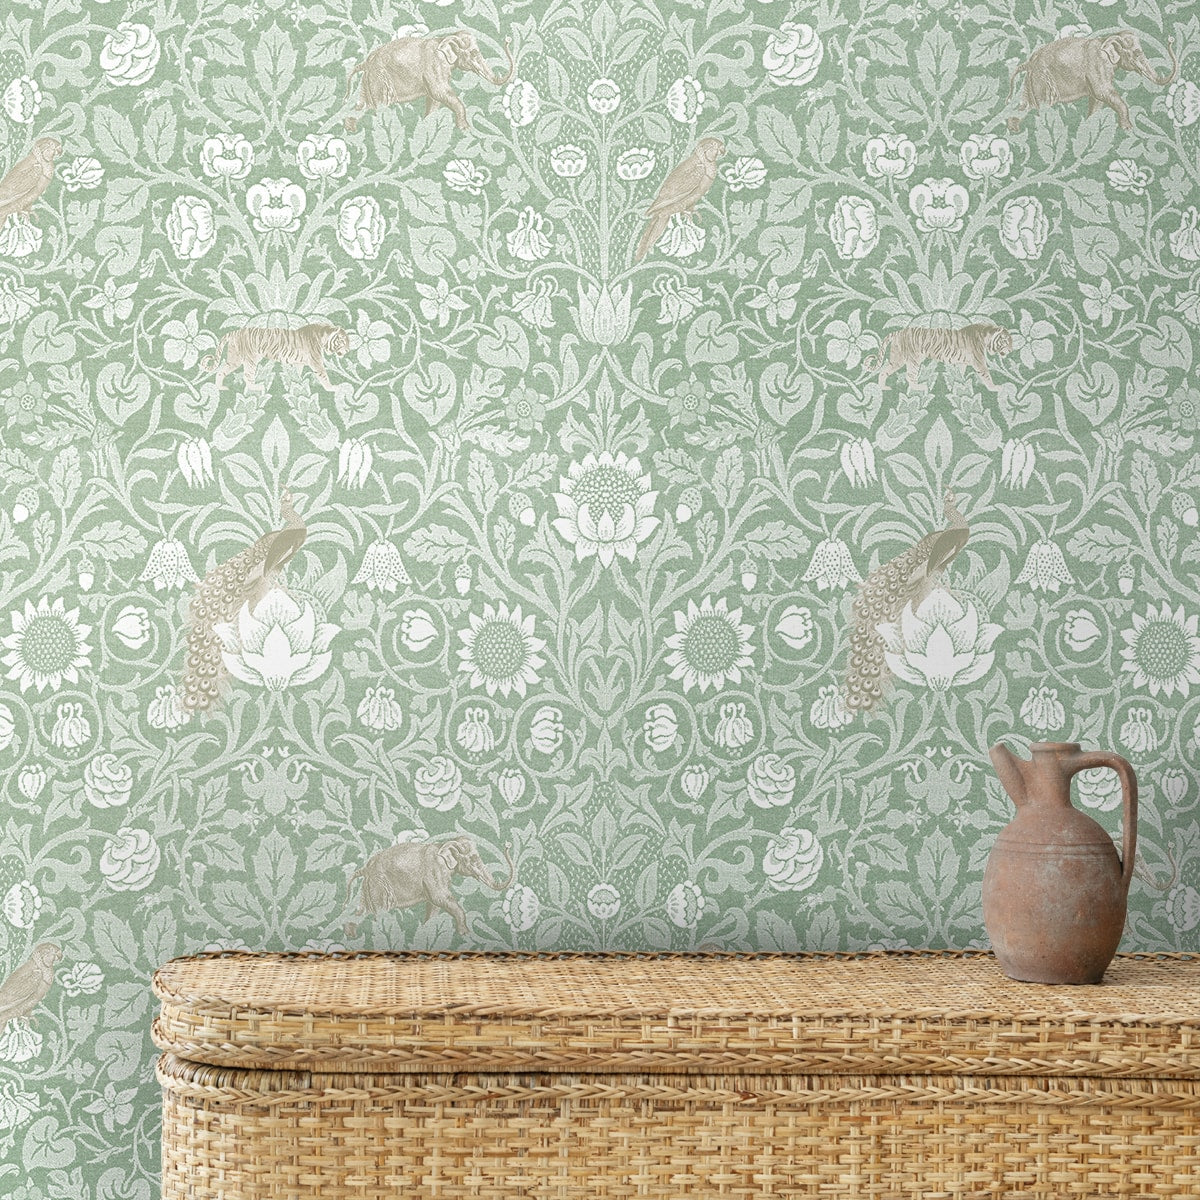 Vintage Style Floral Pattern Wallpaper for Rooms